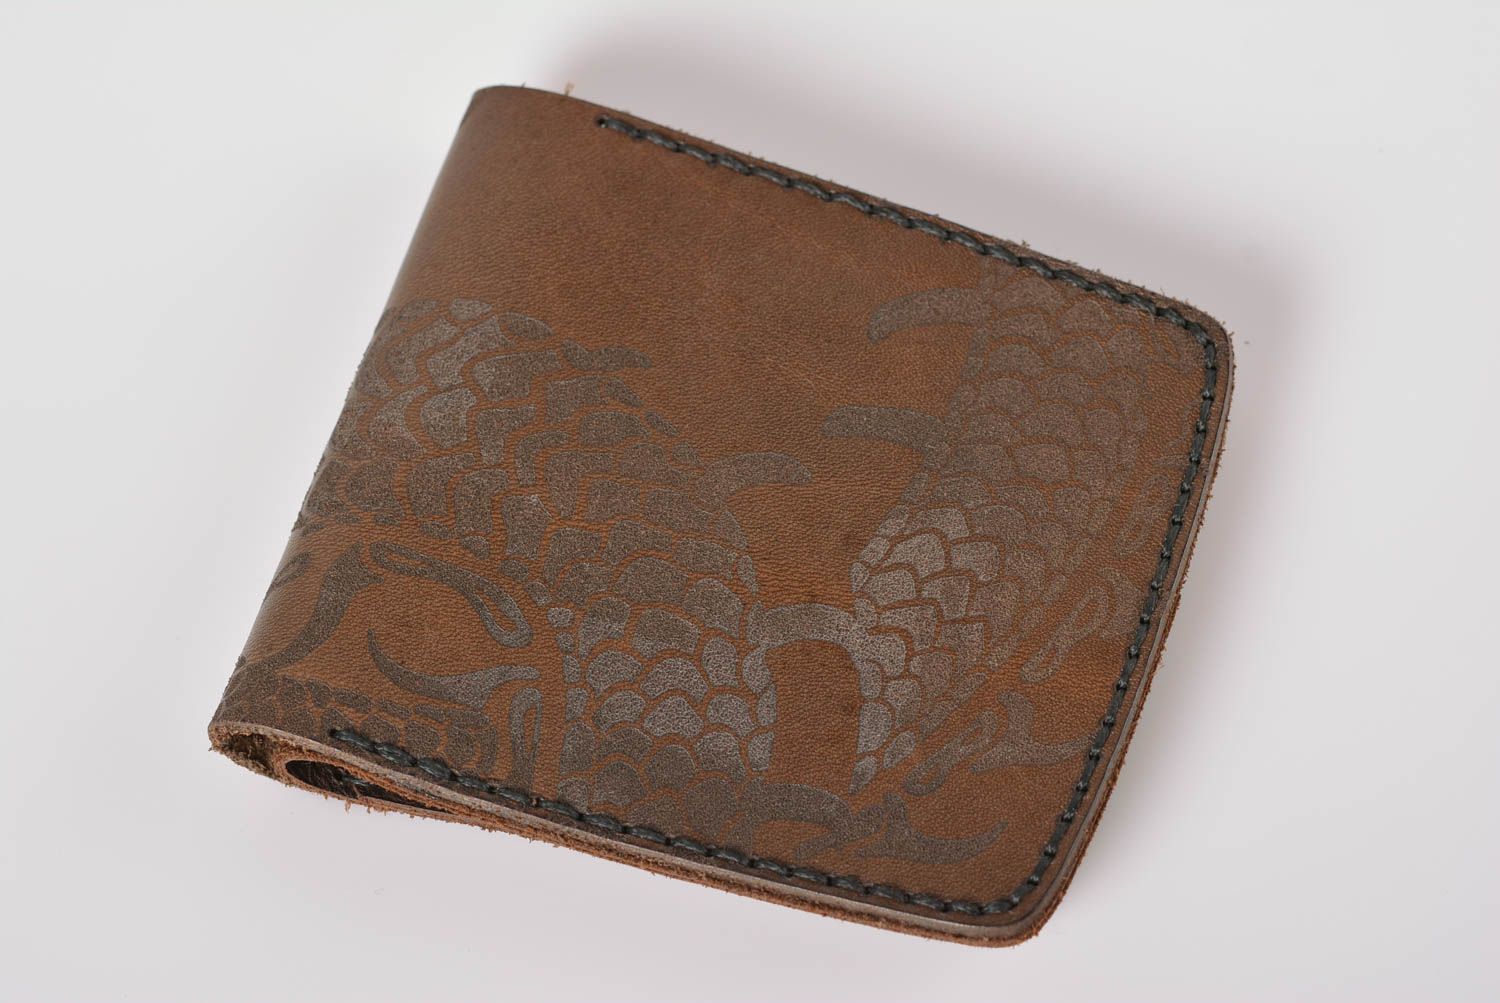 Handmade leather wallet handmade leather goods mens wallet presents for men photo 1